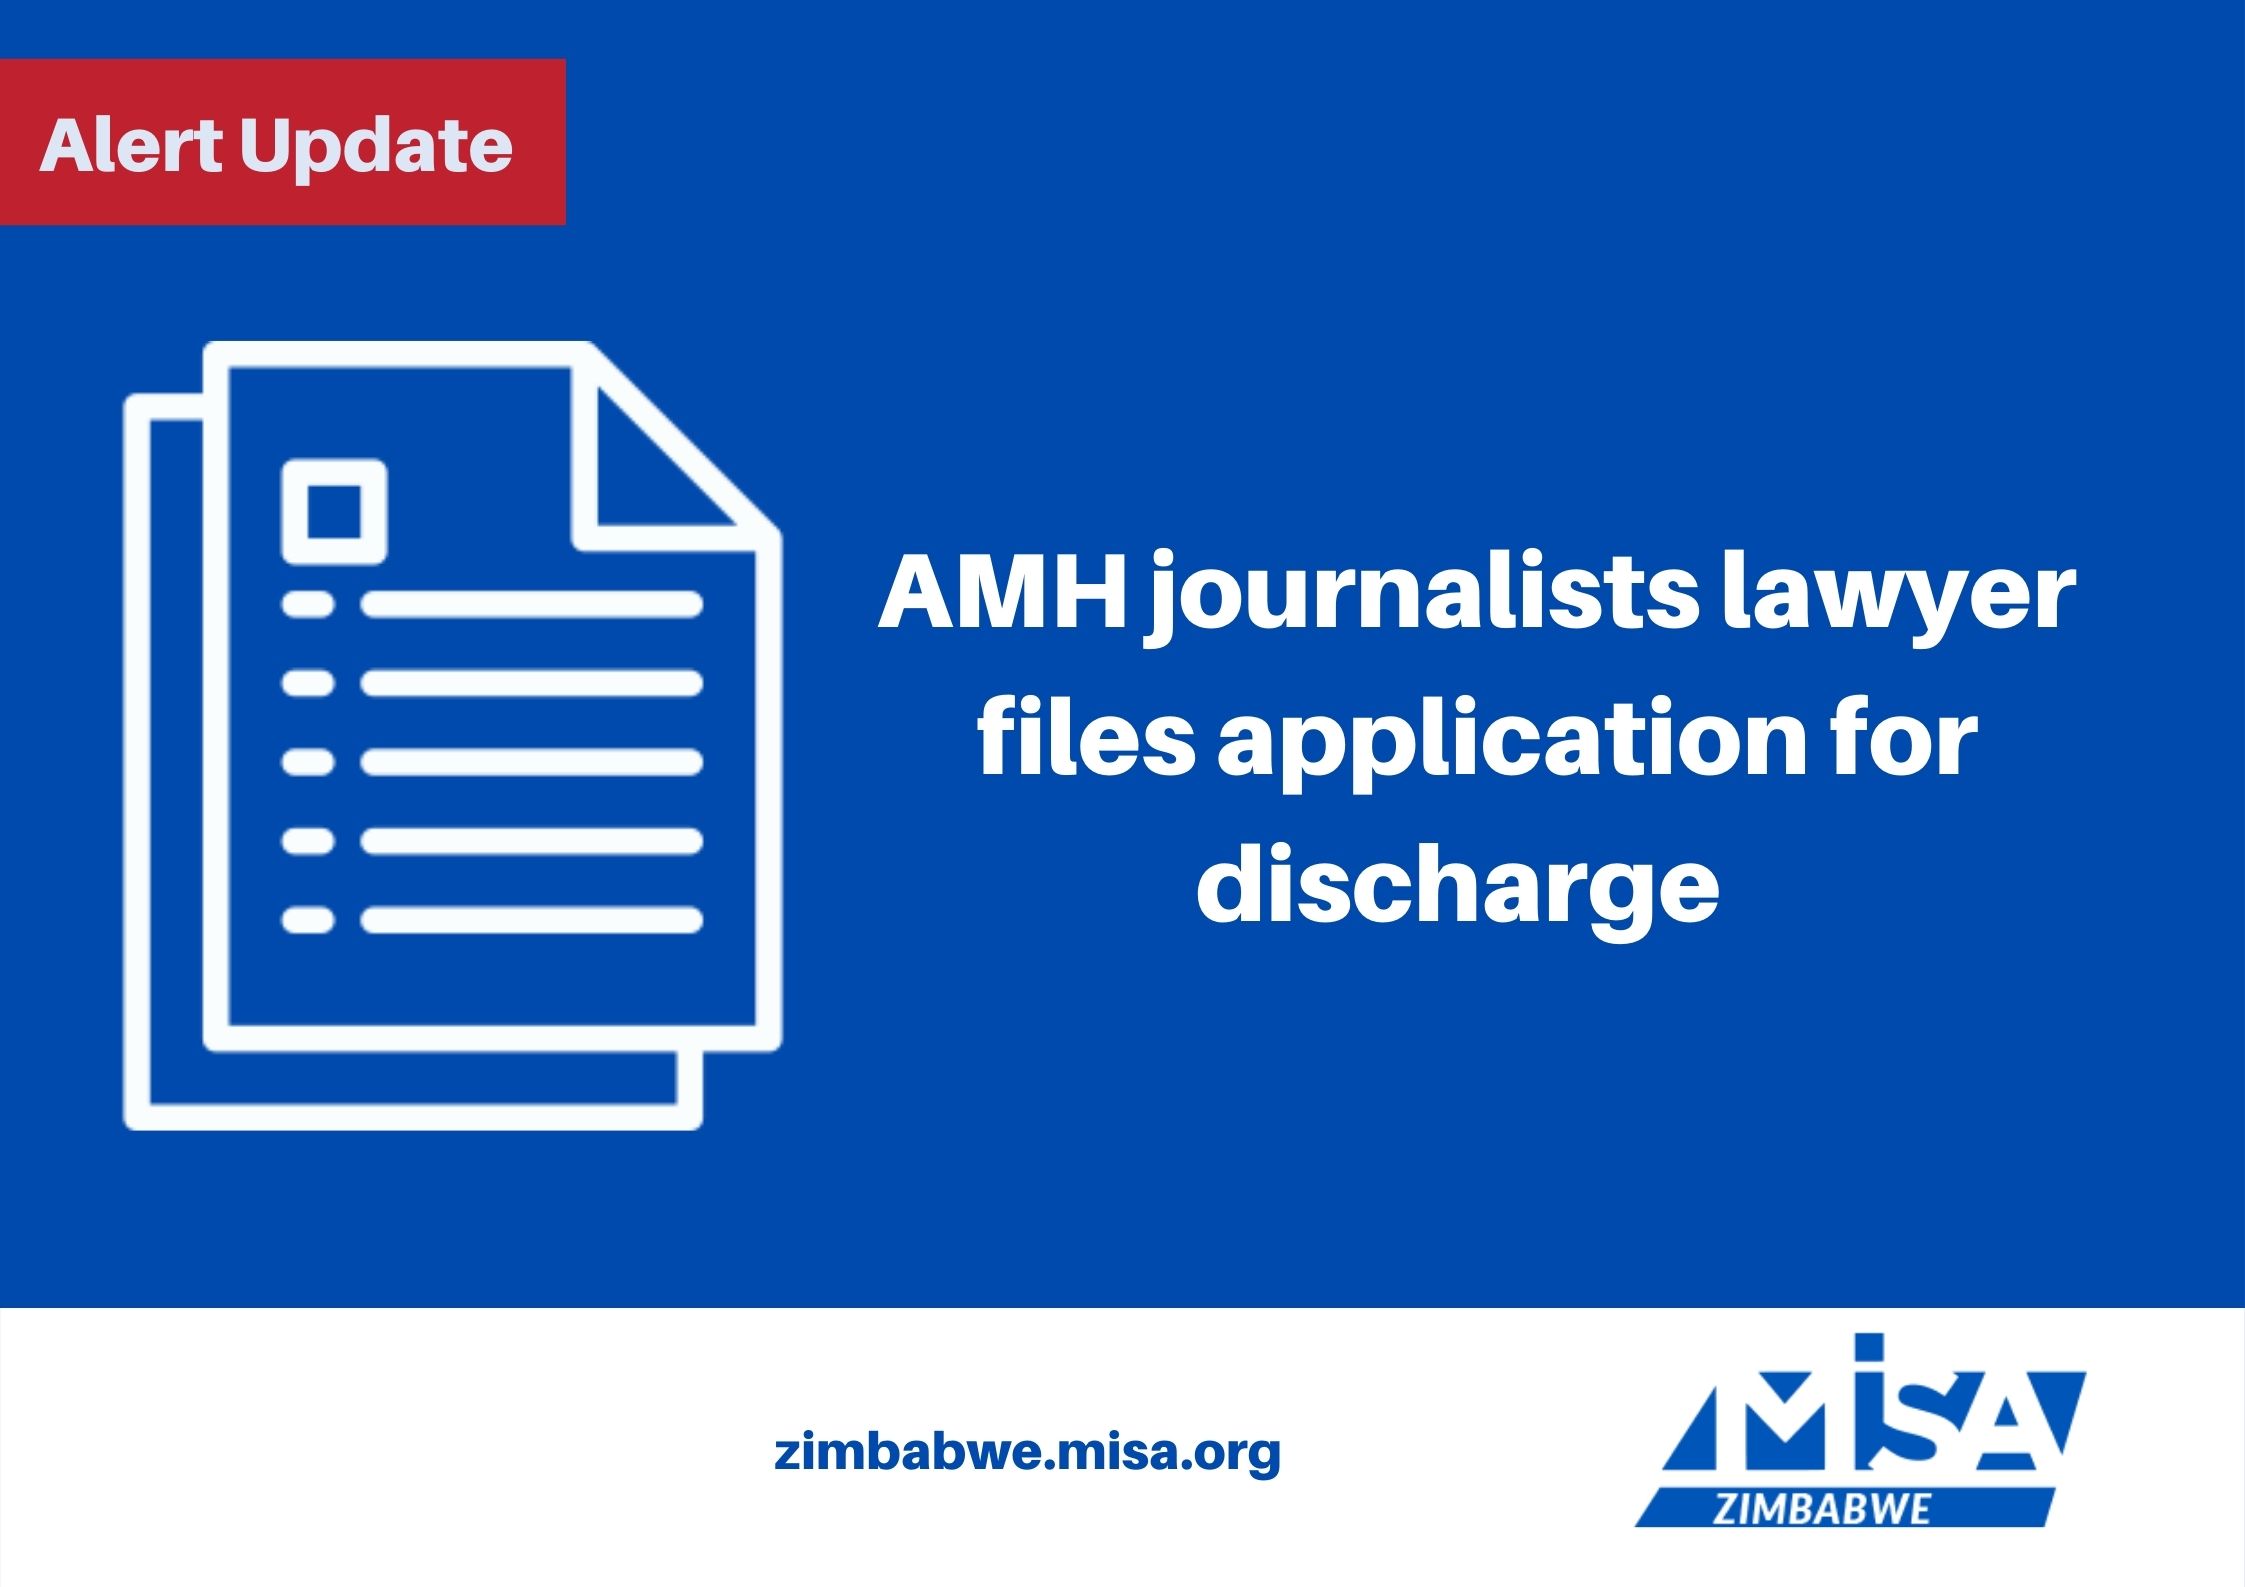 AMH journalists lawyer files application for discharge 